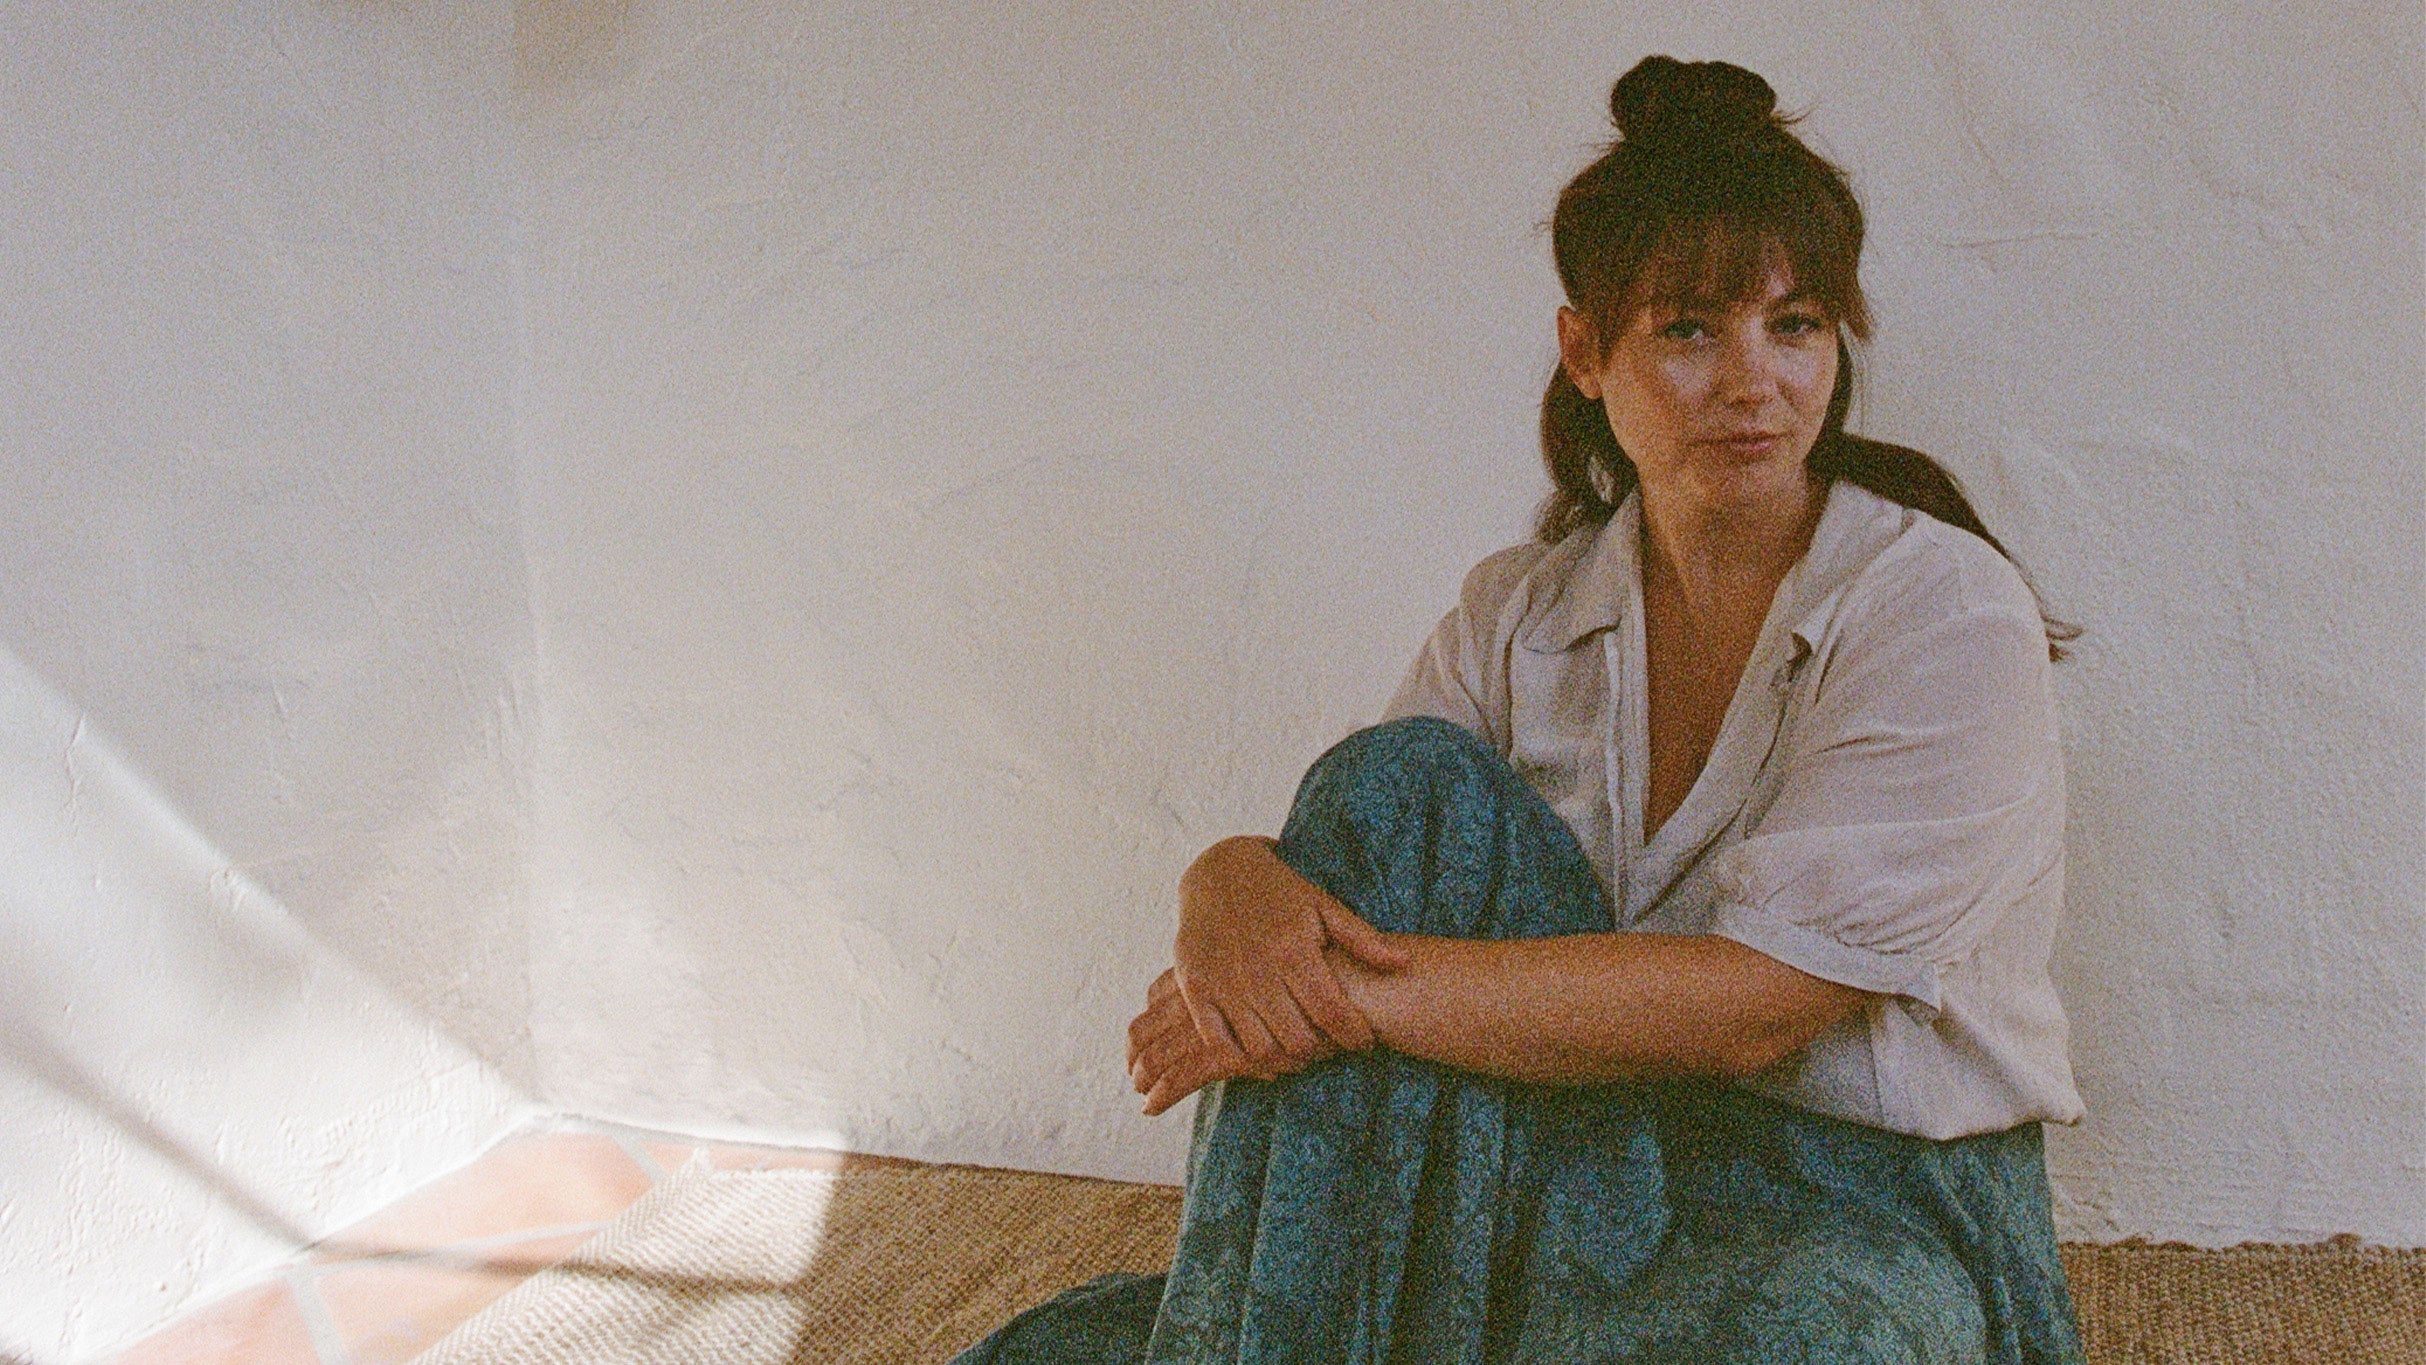 Angel Olsen (Solo): Songs From The Archive in Red Bank promo photo for Member presale offer code